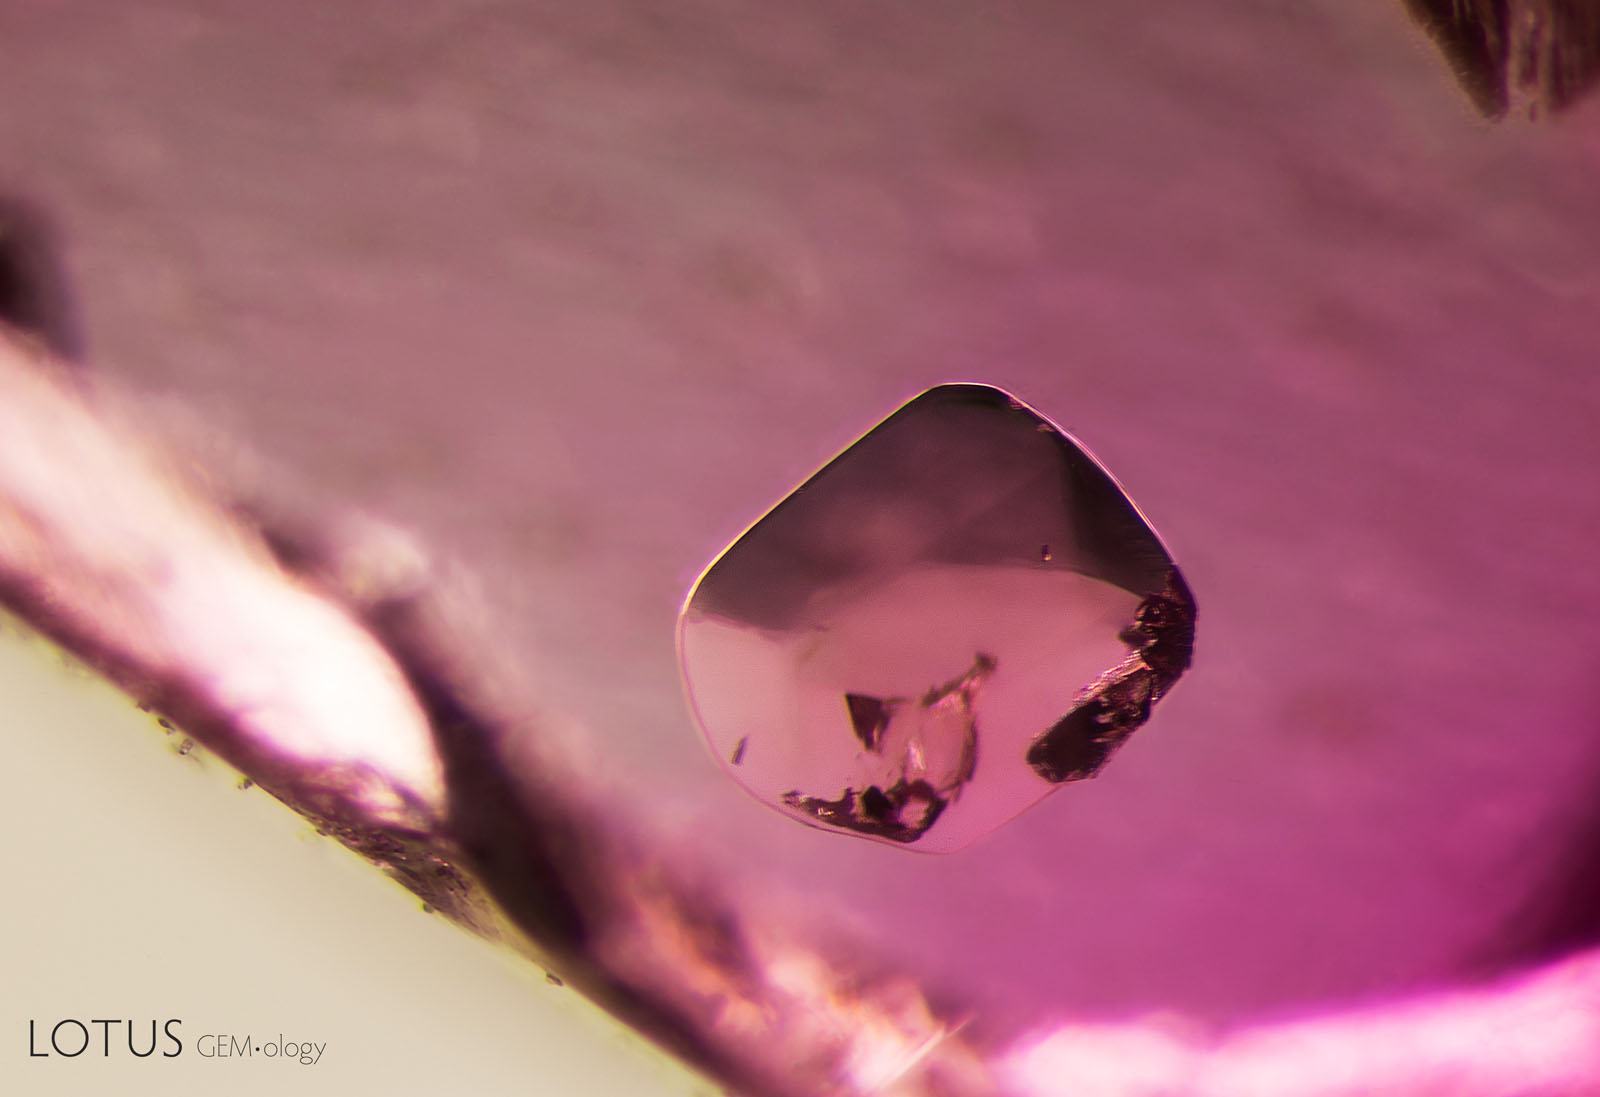 Spinel crystals, such as this one in sample 15, were seen frequently in the Burmese ruby samples.